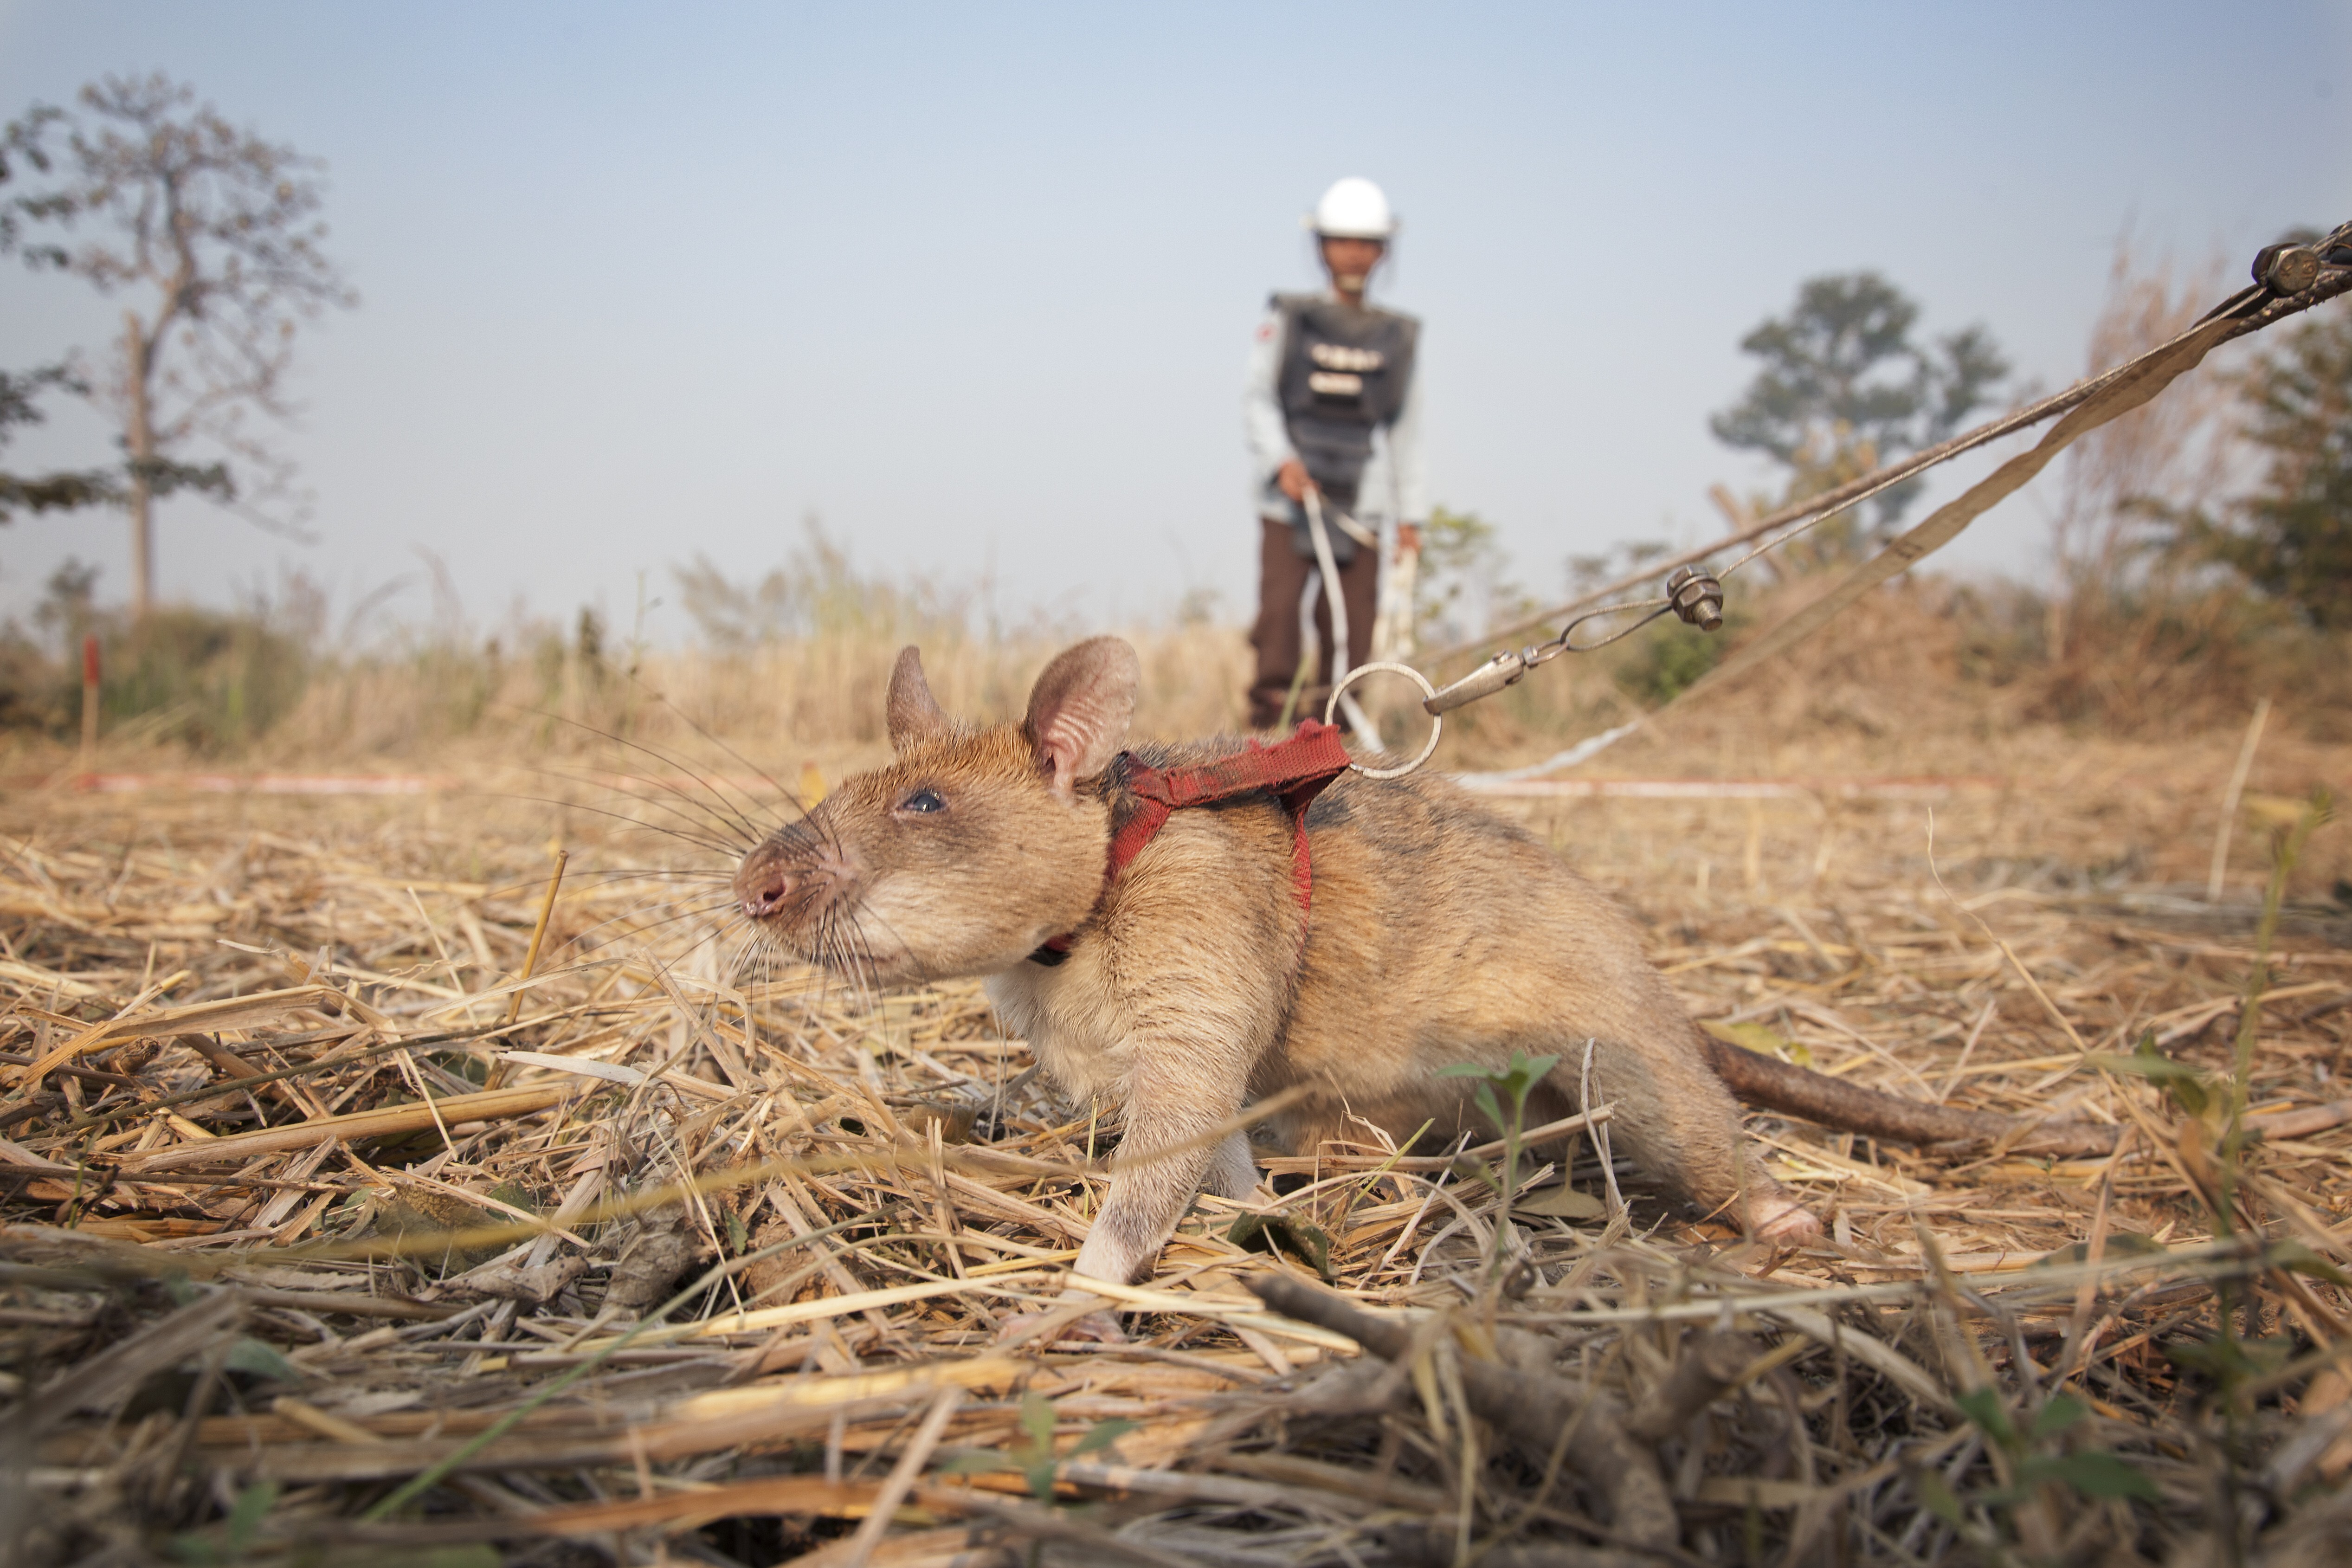 The charity Apopo trains rats for mine clearing. Photo: Apopo